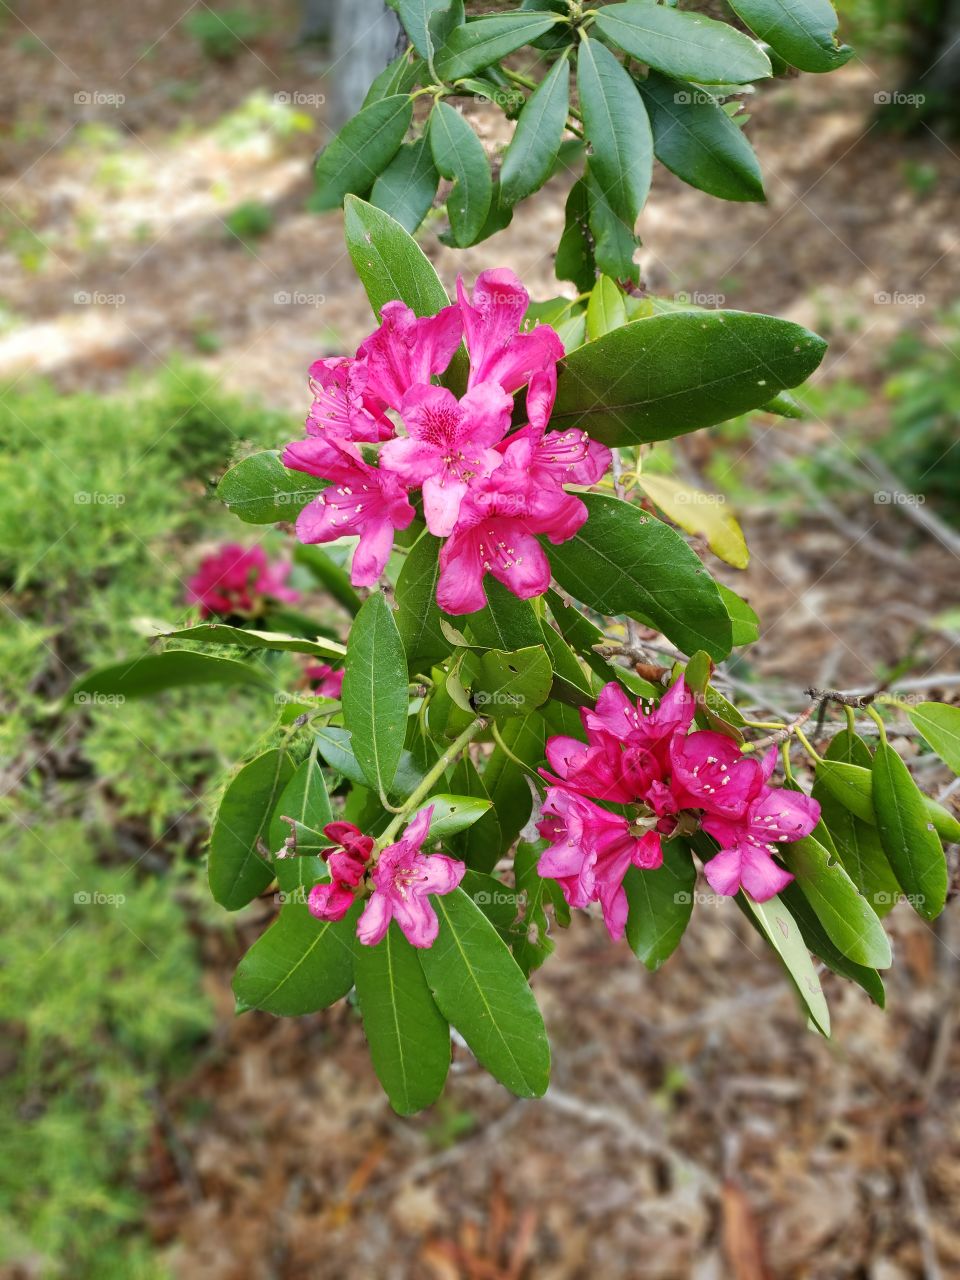 Rhododendron blooms